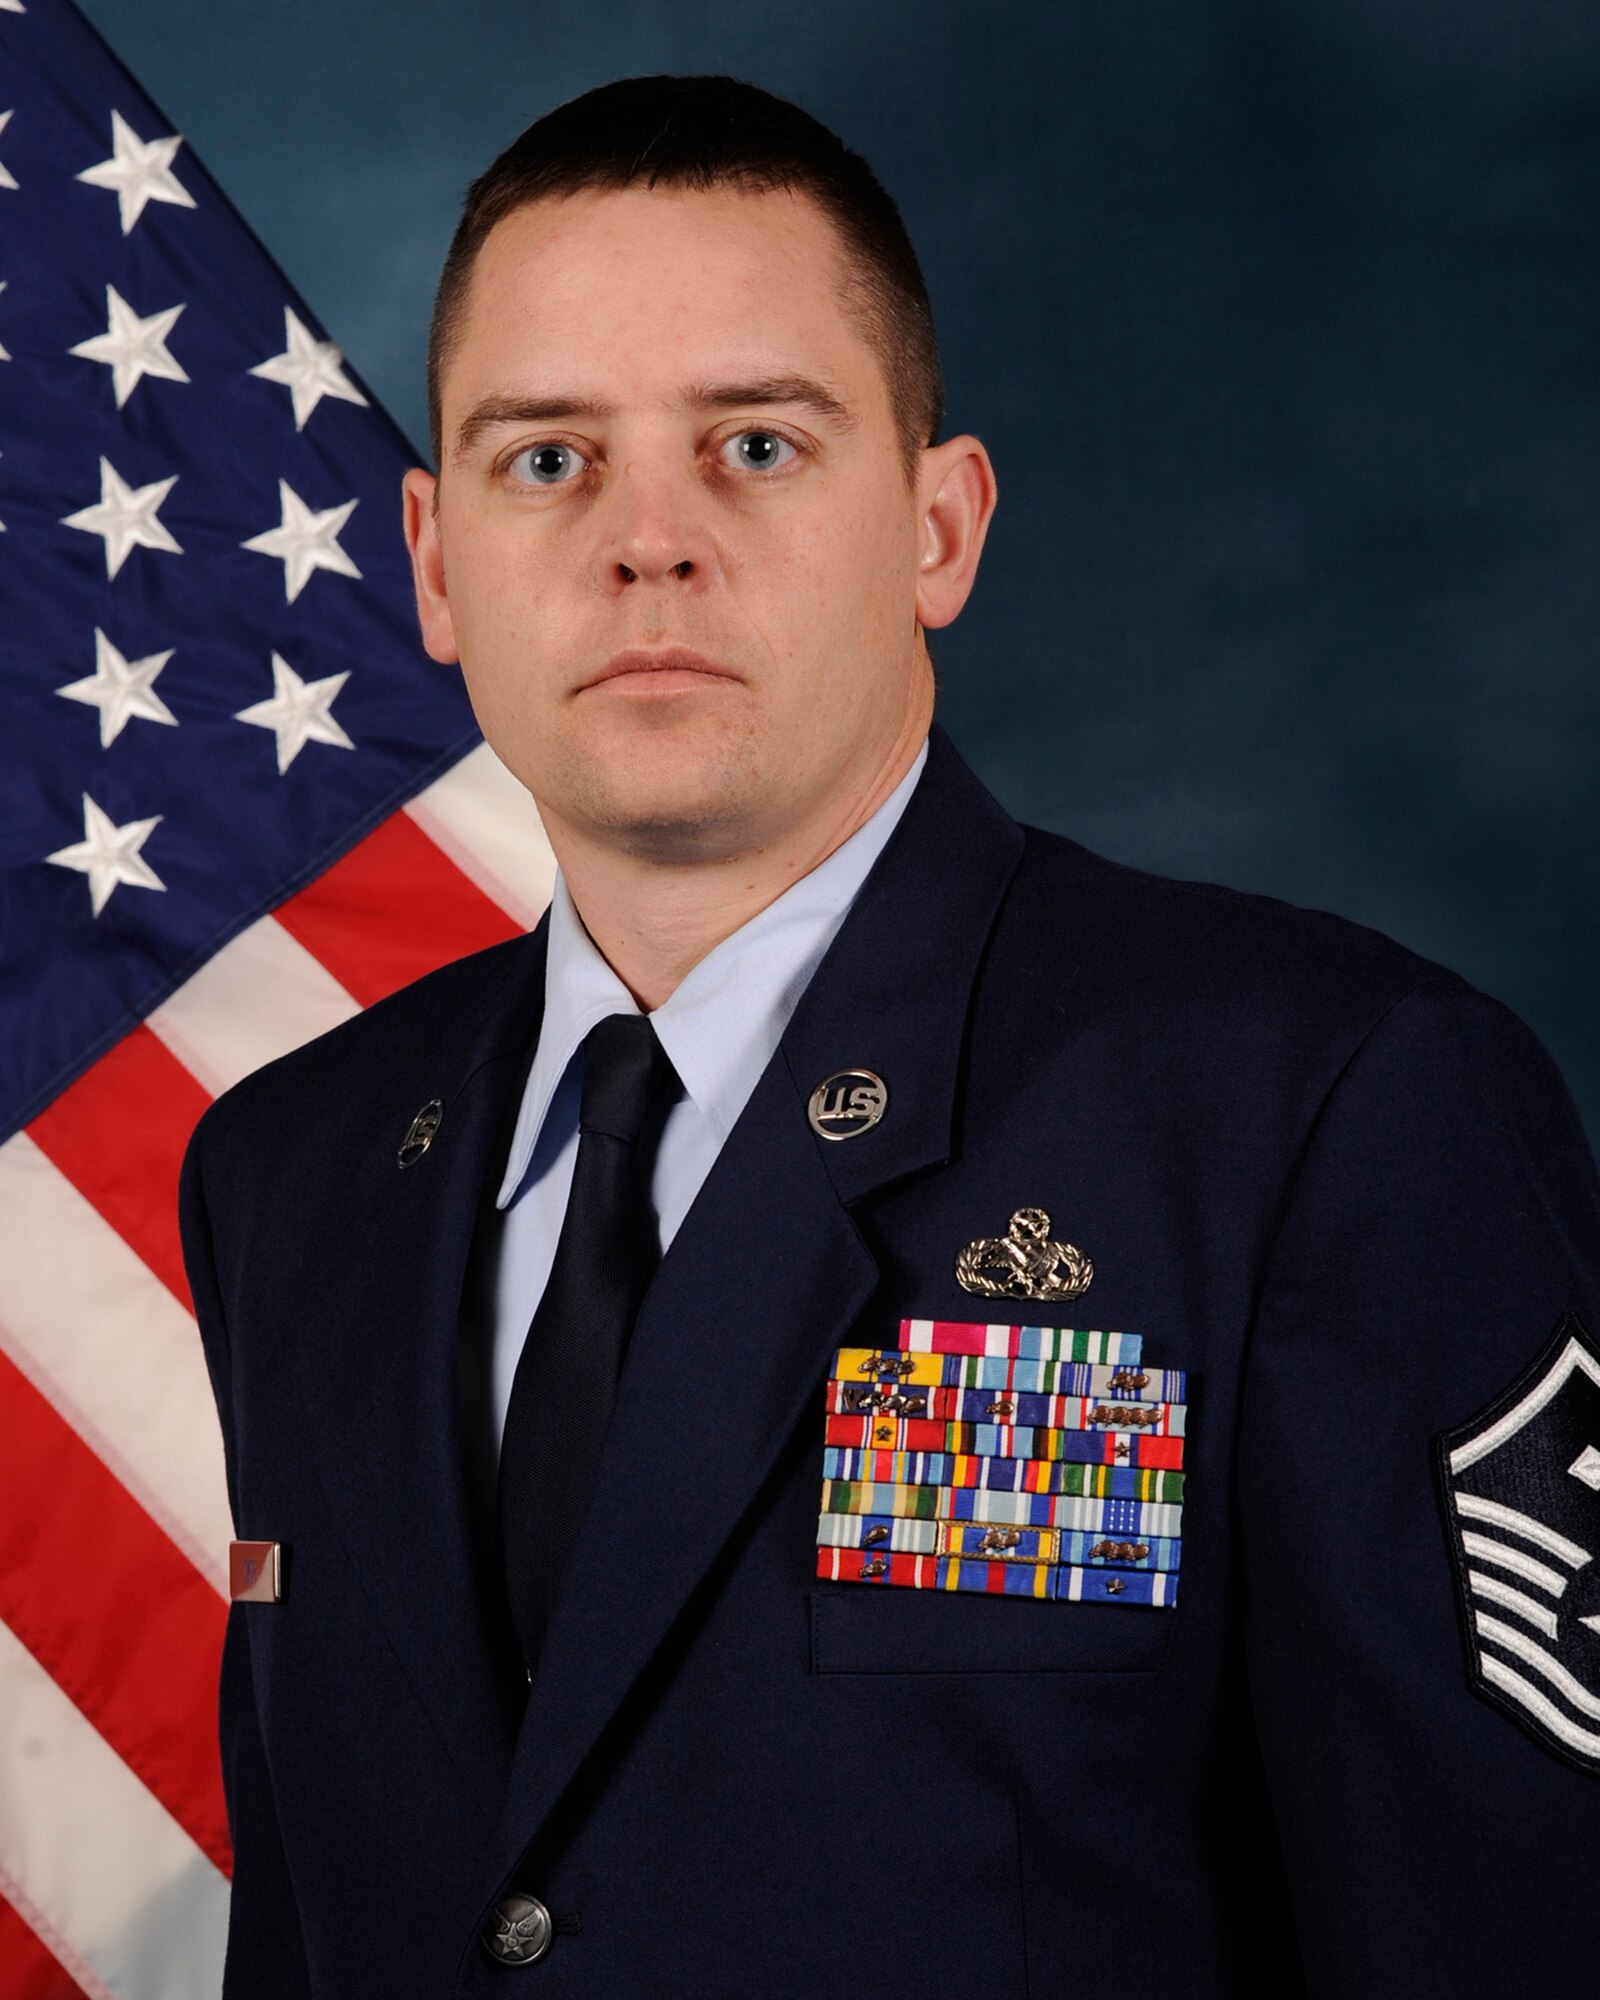 OFFUTT AIR FORCE BASE, Neb. -- Master Sgt. Michael C. Dyer, from Langley AFB, Va., is one of 29 Airmen nominated for awards who will attend the 2010 Air Combat Command Outstanding Airmen of the Year Awards Banquet in Omaha, Neb., April 21. Sergeant Dyer is nominated for the First Sergeant of the Year Award. U.S. Air Force courtesy photo